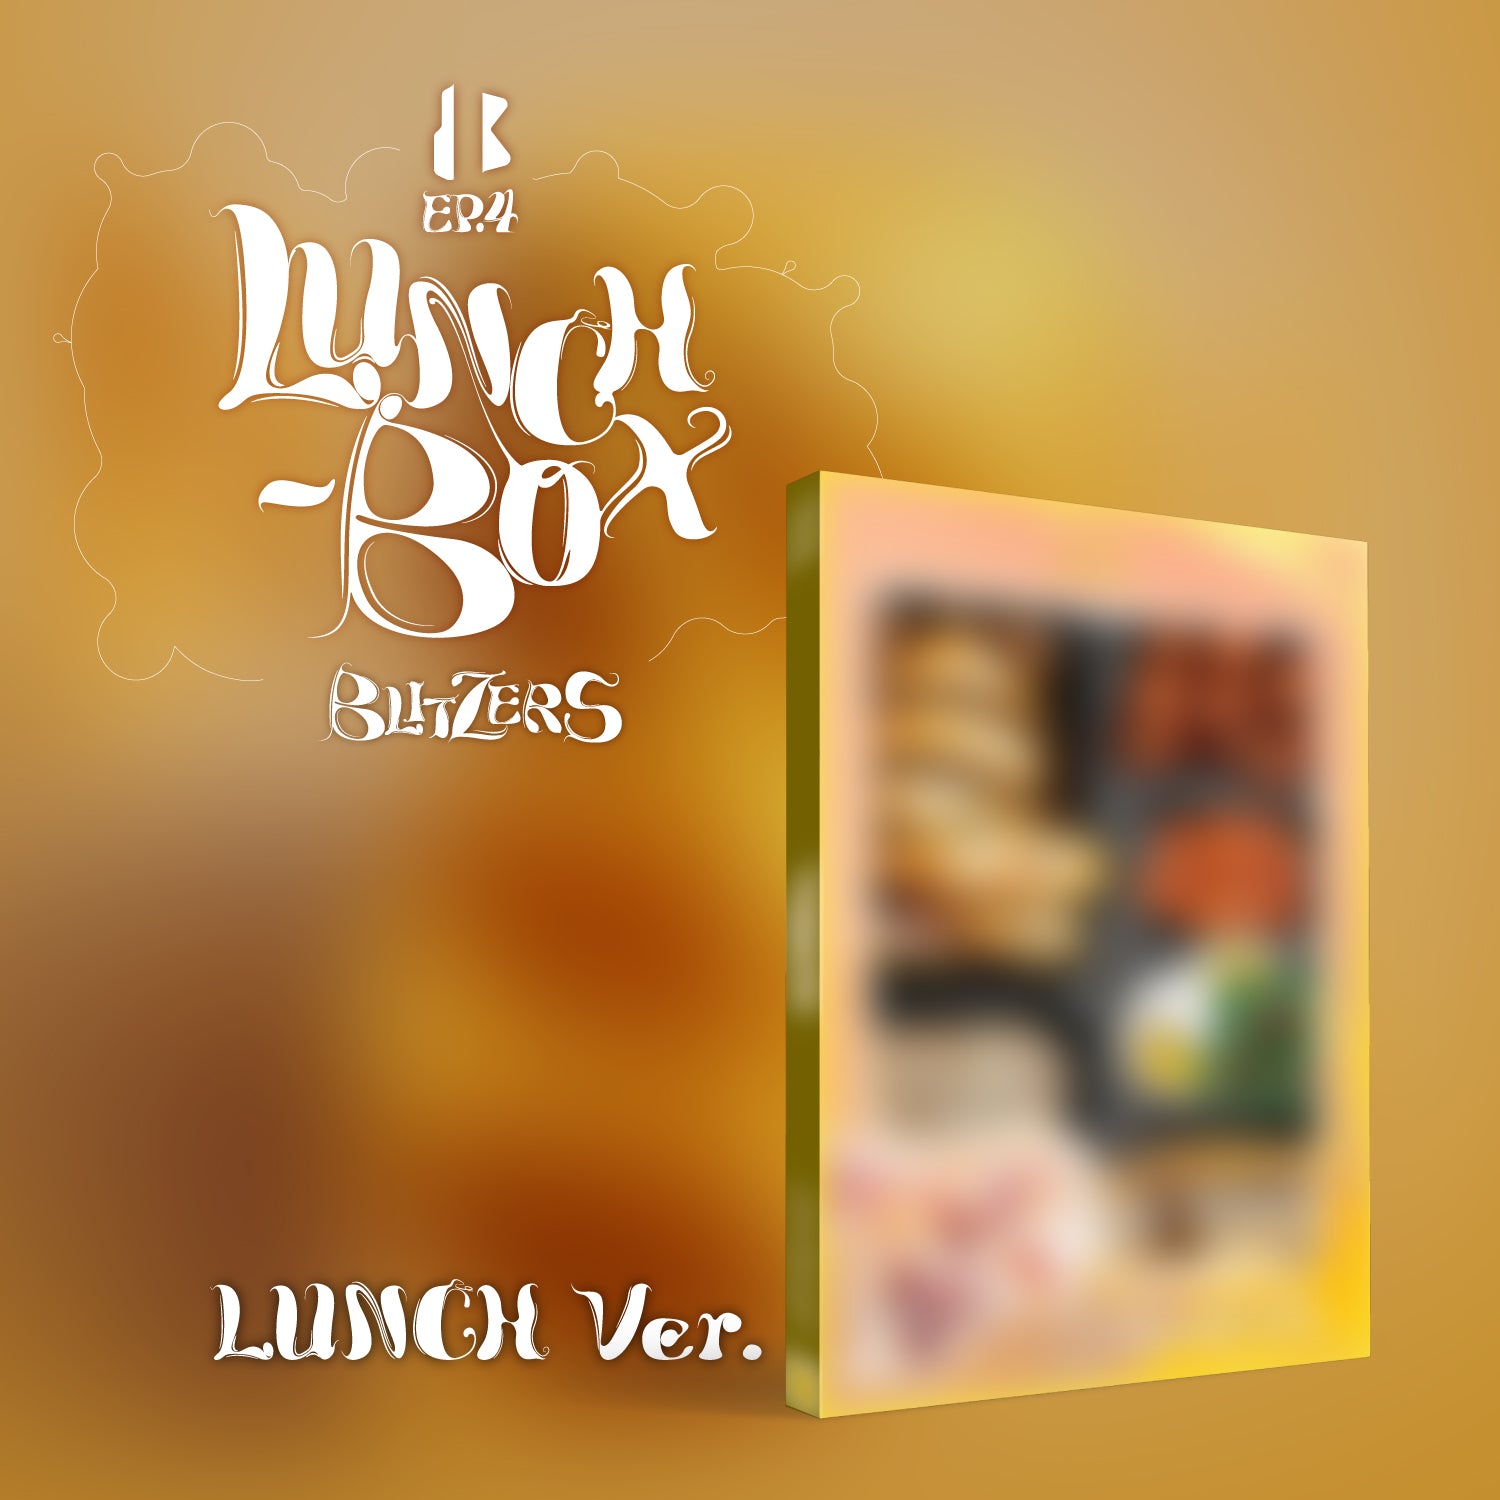 BLITZERS - LUNCH-BOX 4TH EP ALBUM PHOTOBOOK LUNCH VER.